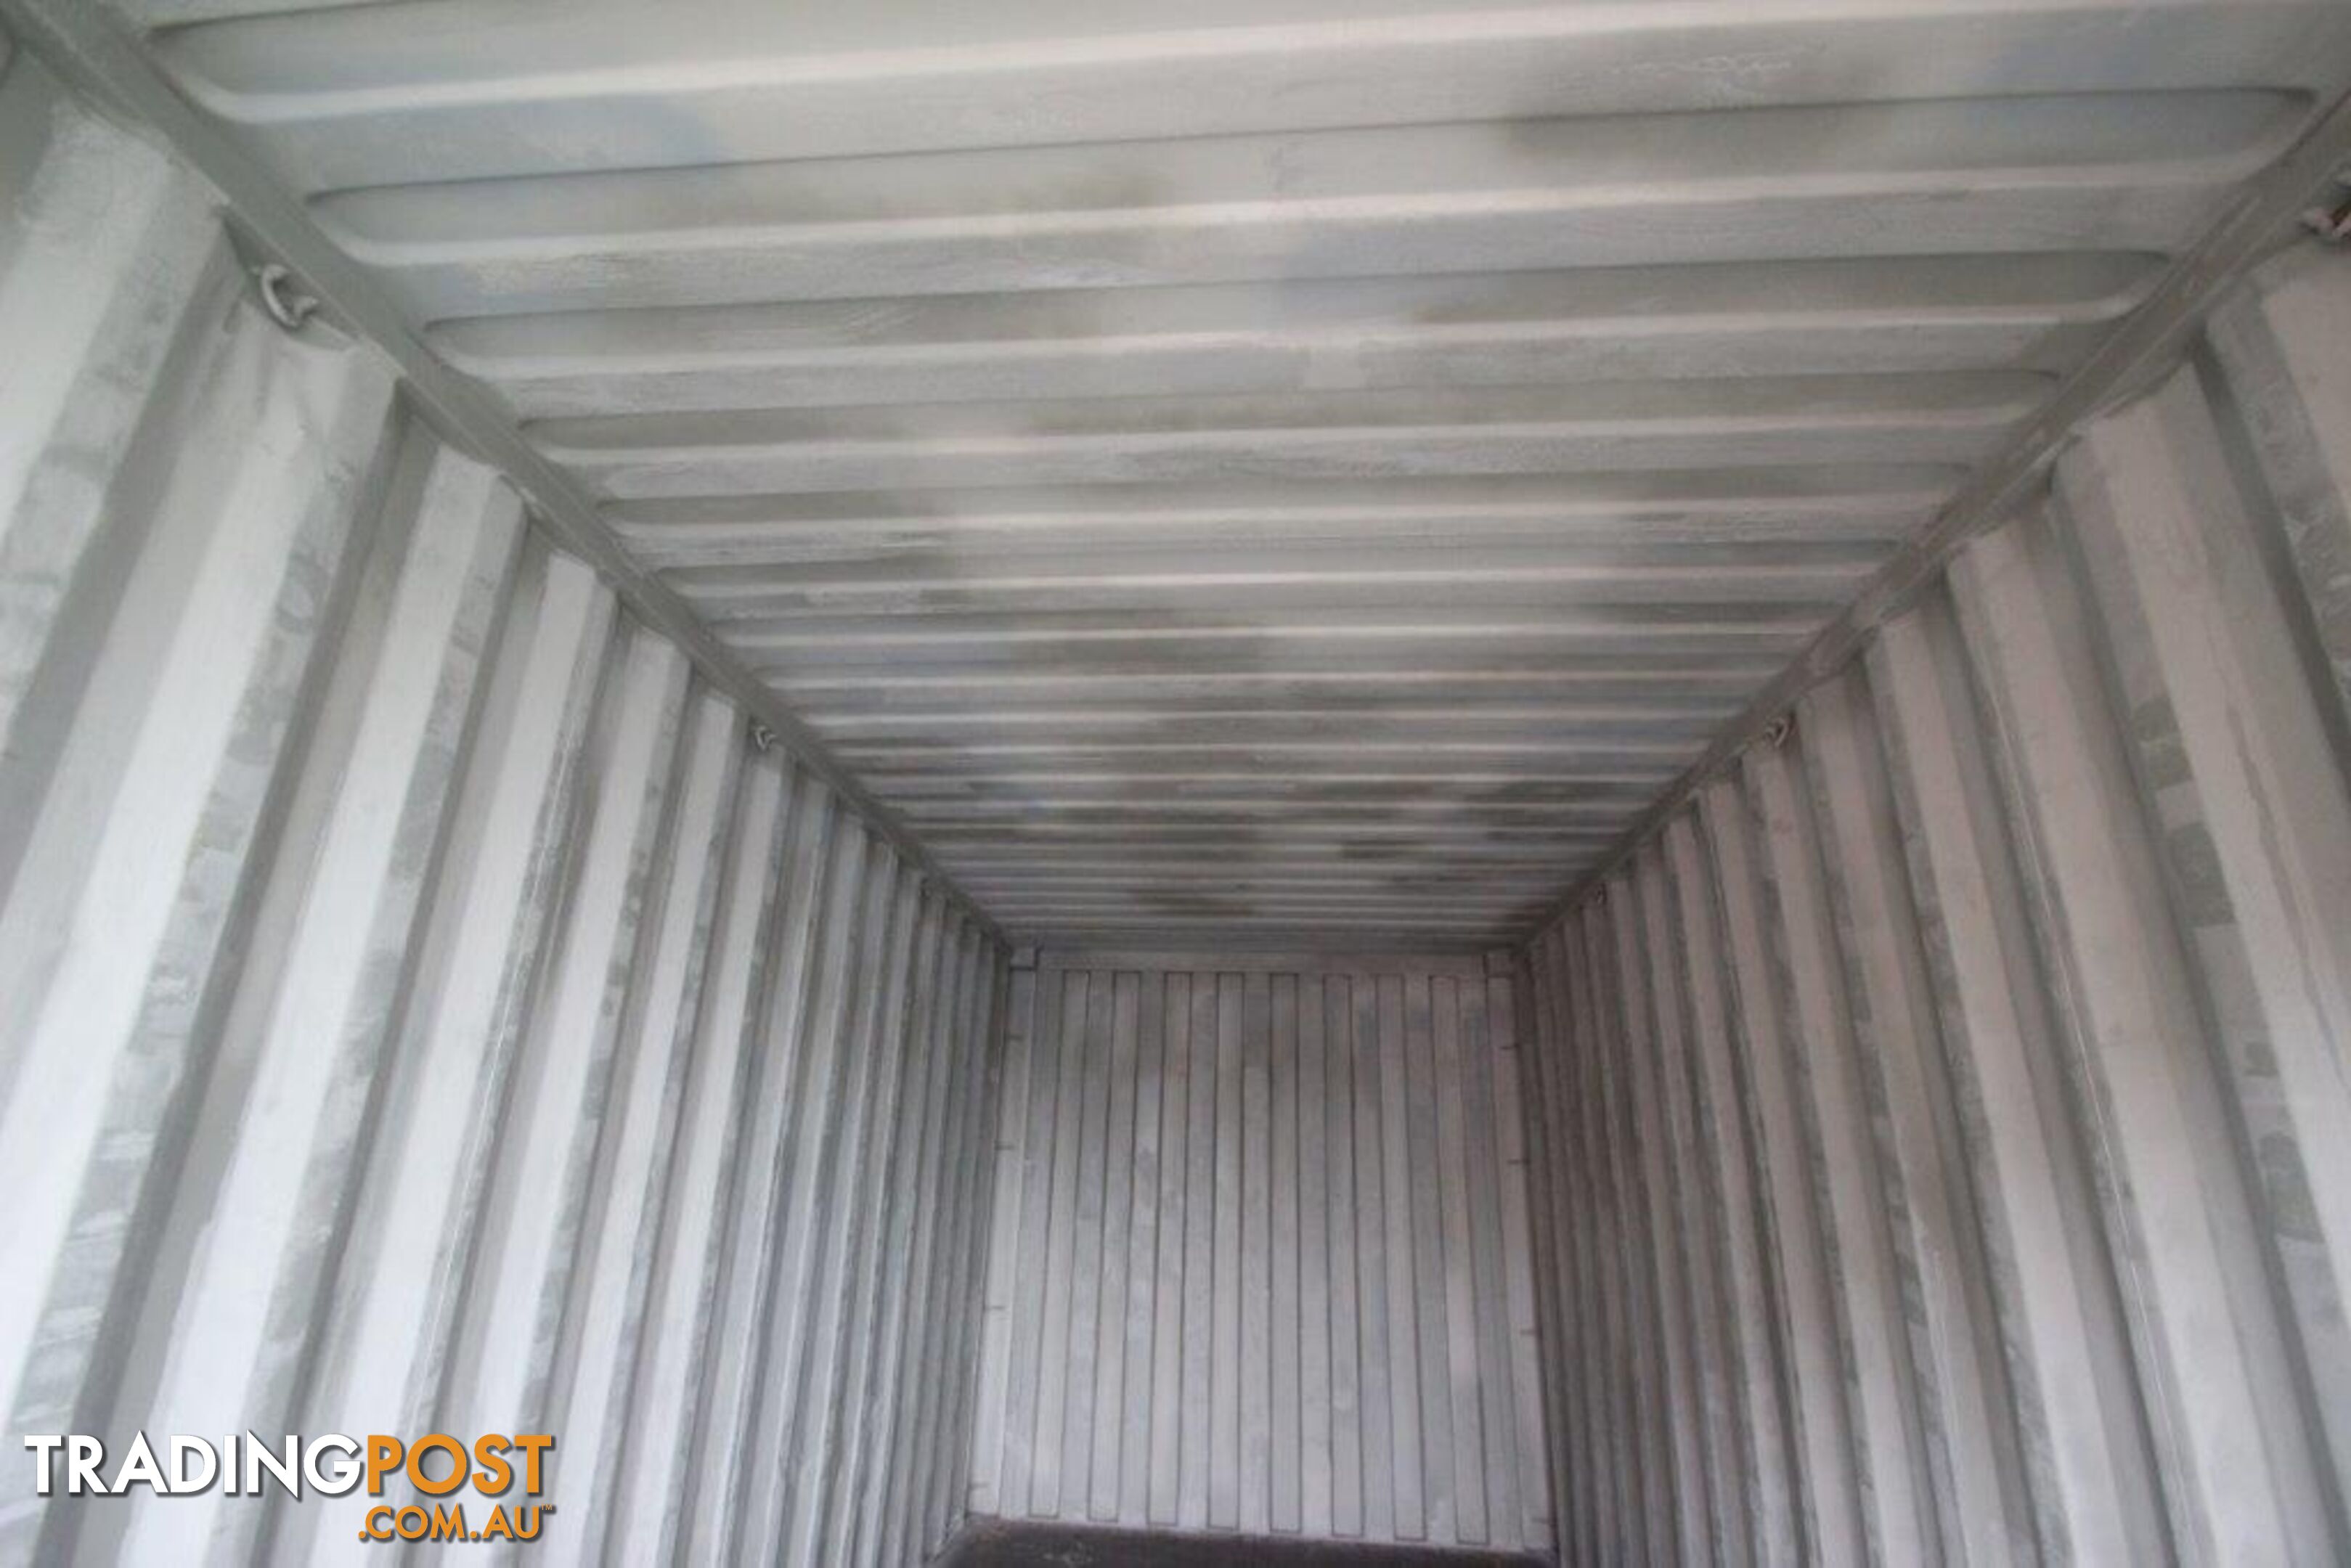 Used 20ft Shipping Containers Williamtown - From $3650 + GST